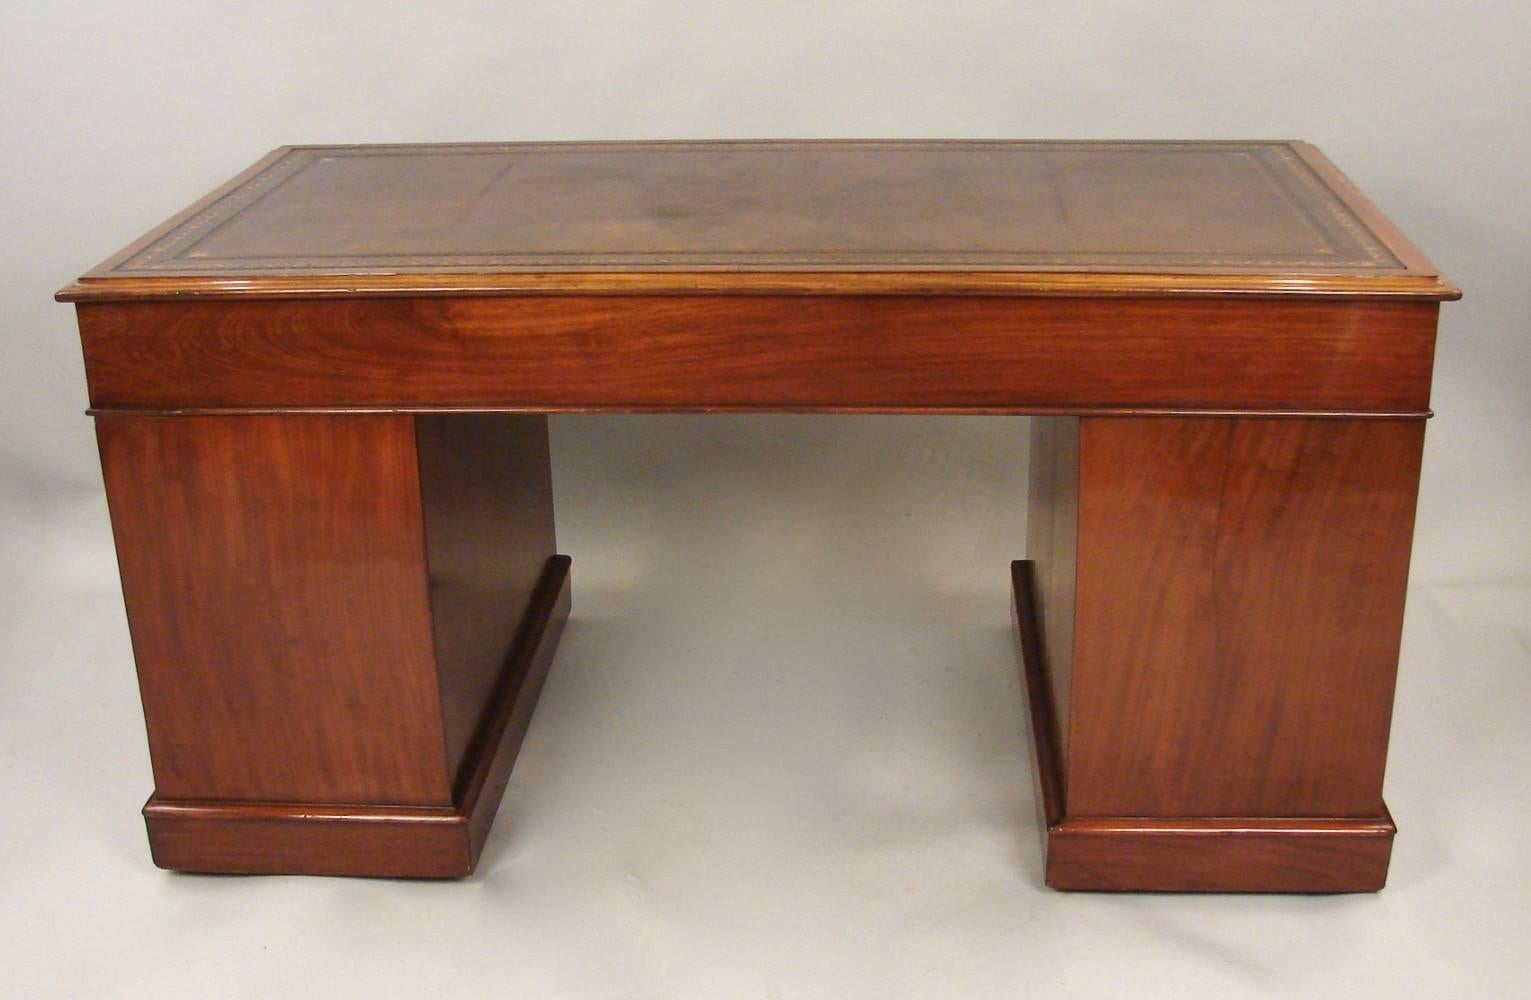 Georgian Style Mahogany Pedestal Desk with Inset Gilt-Tooled Leather Top 2